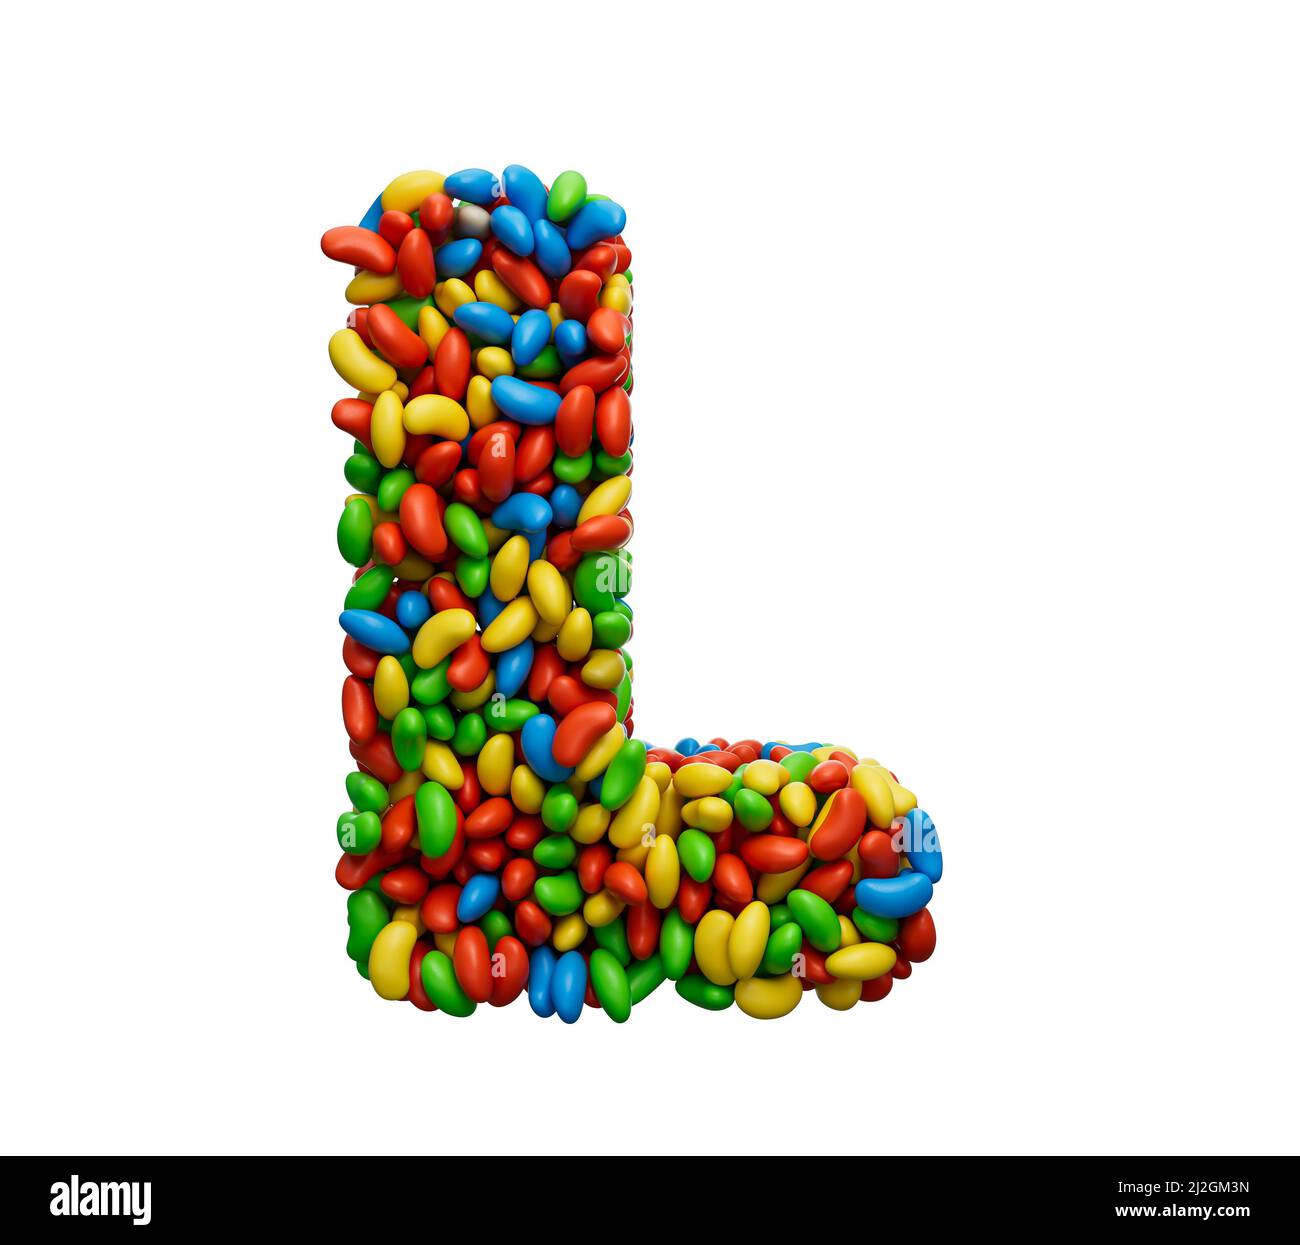 A 3D rendering of the alphabet L letter made with colorful jelly beans isolated on white background Stock Photo